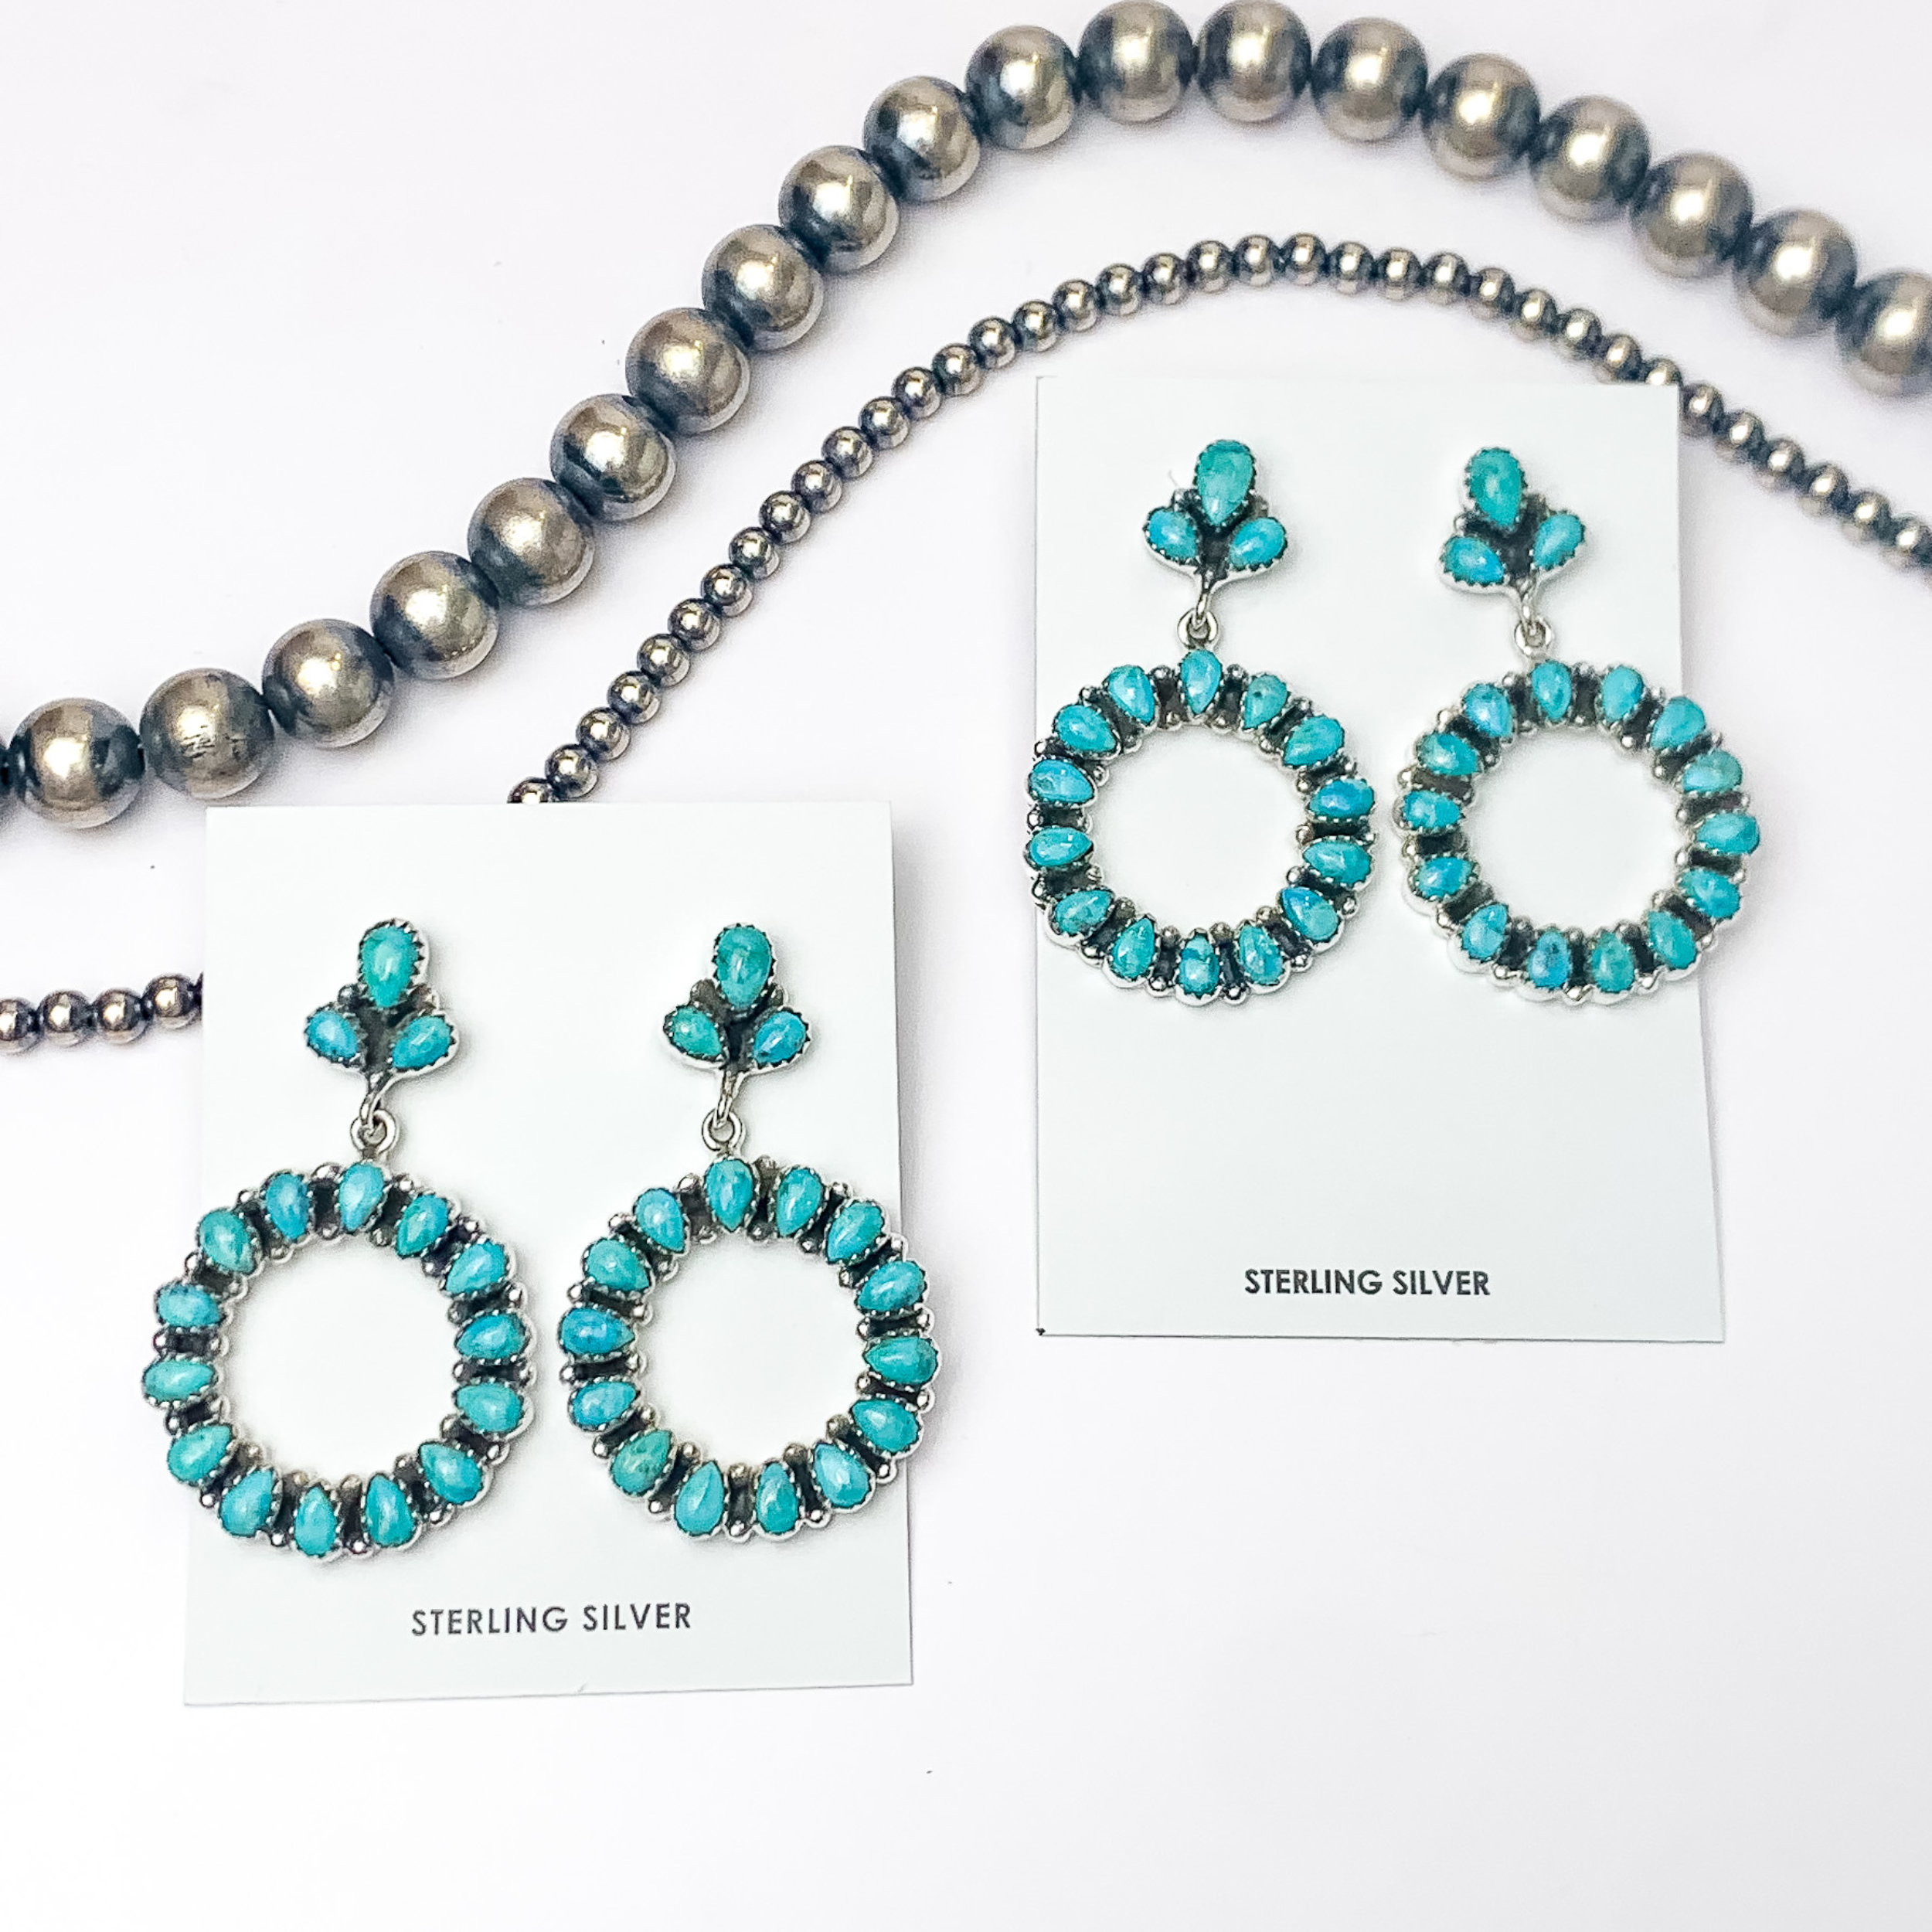 In the picture are stud cluster earrings with a circle drop in the color kinsman turquoise with a white background